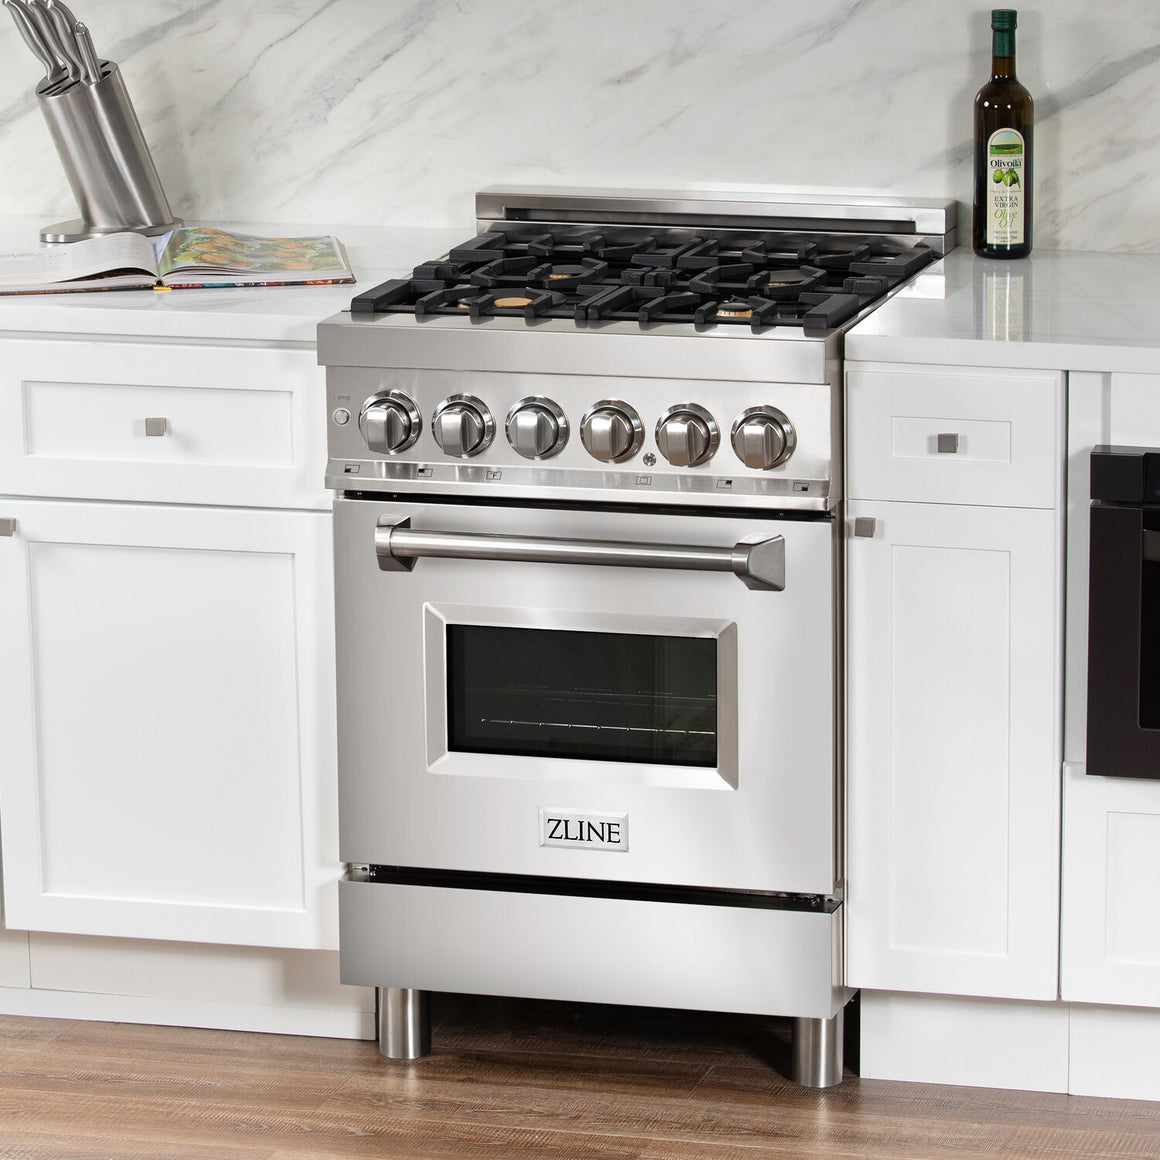 ZLINE 24 in. Professional 4.0 cu. ft. Dual Fuel Range in DuraSnow Stainless Steel with Brass Burners (RAS-SN-BR-24)